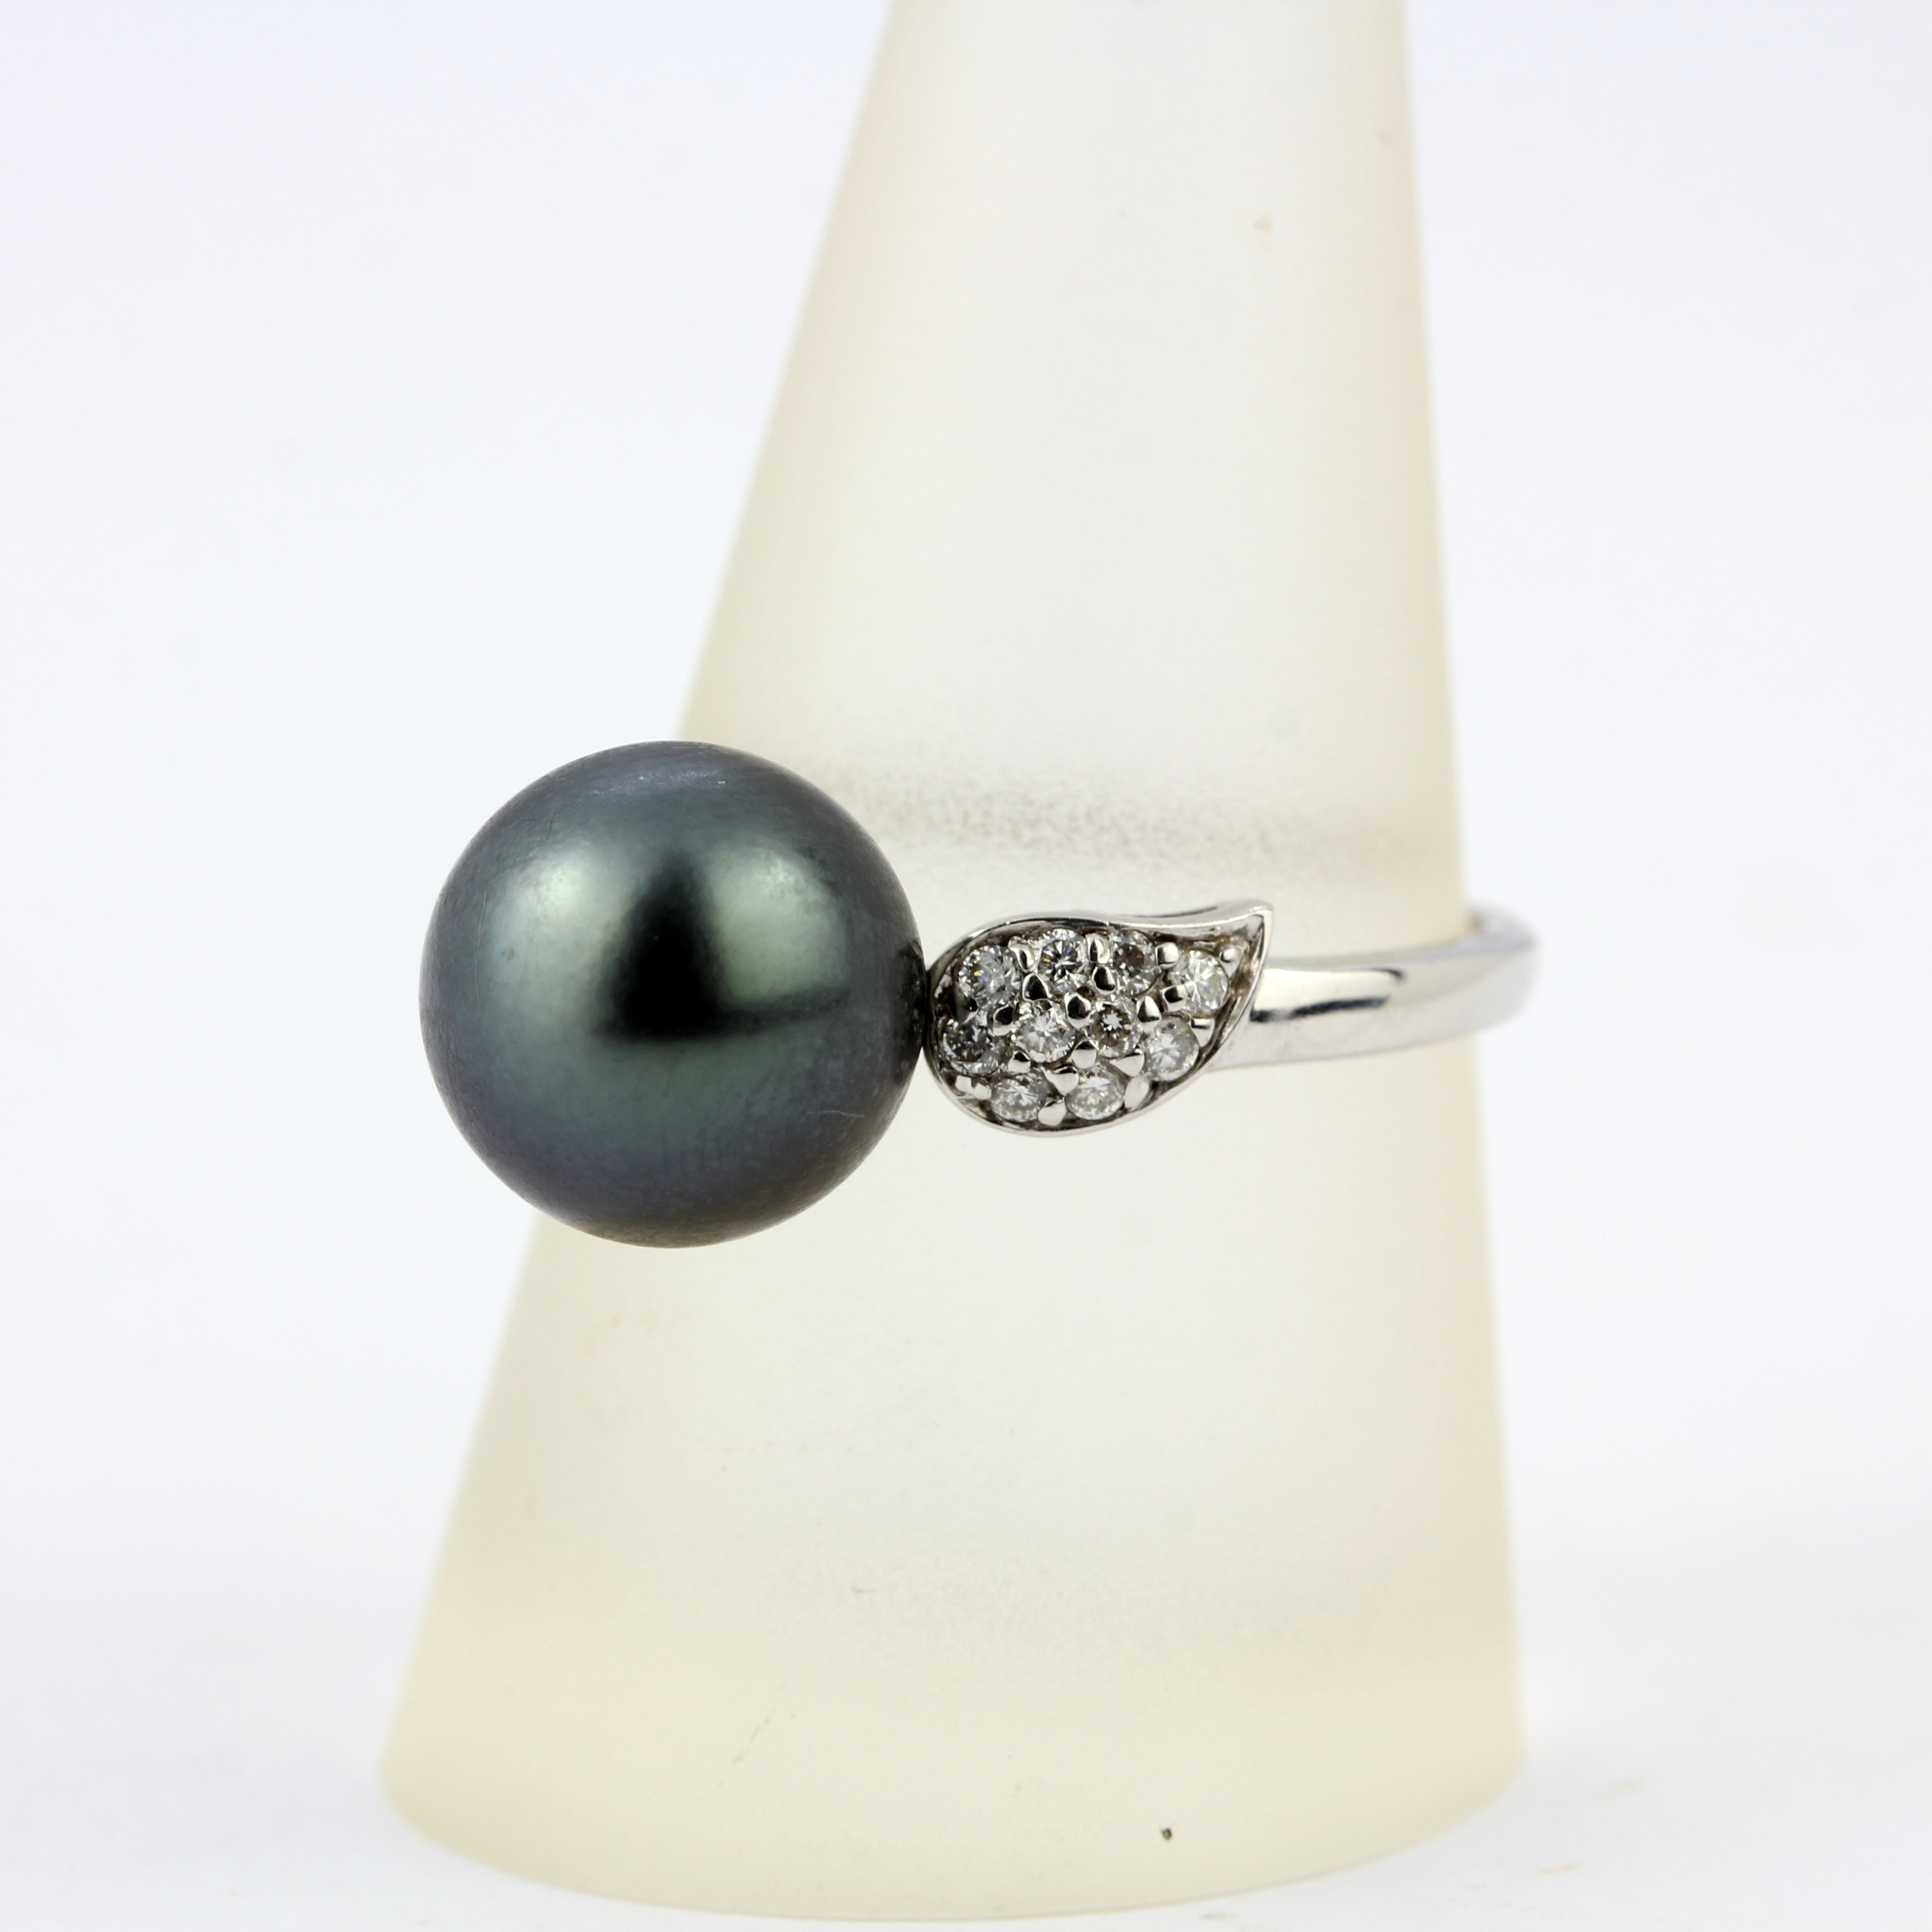 A 9ct white gold ring set with a black Tahitian pearl and diamond set shoulders, ring size S.5. - Image 3 of 3